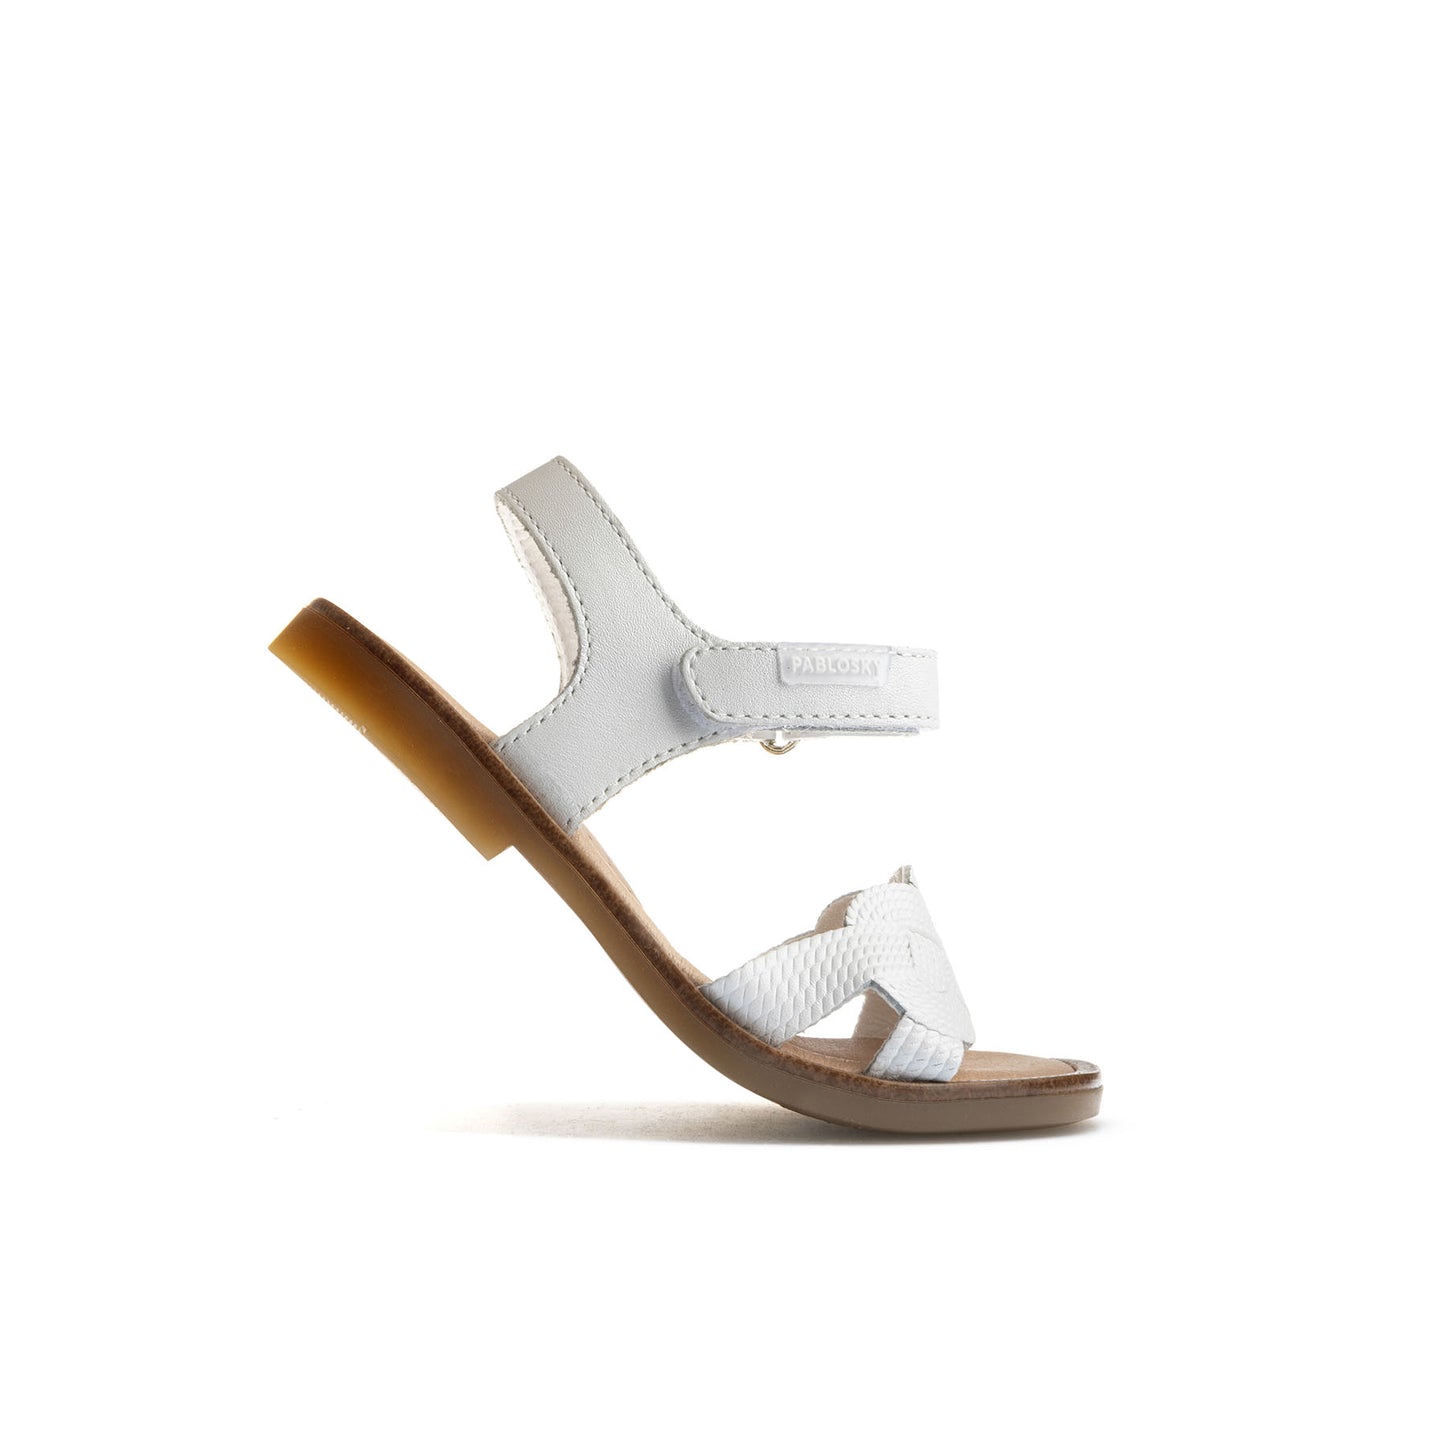 Pablosky Leather Sandals / 419408